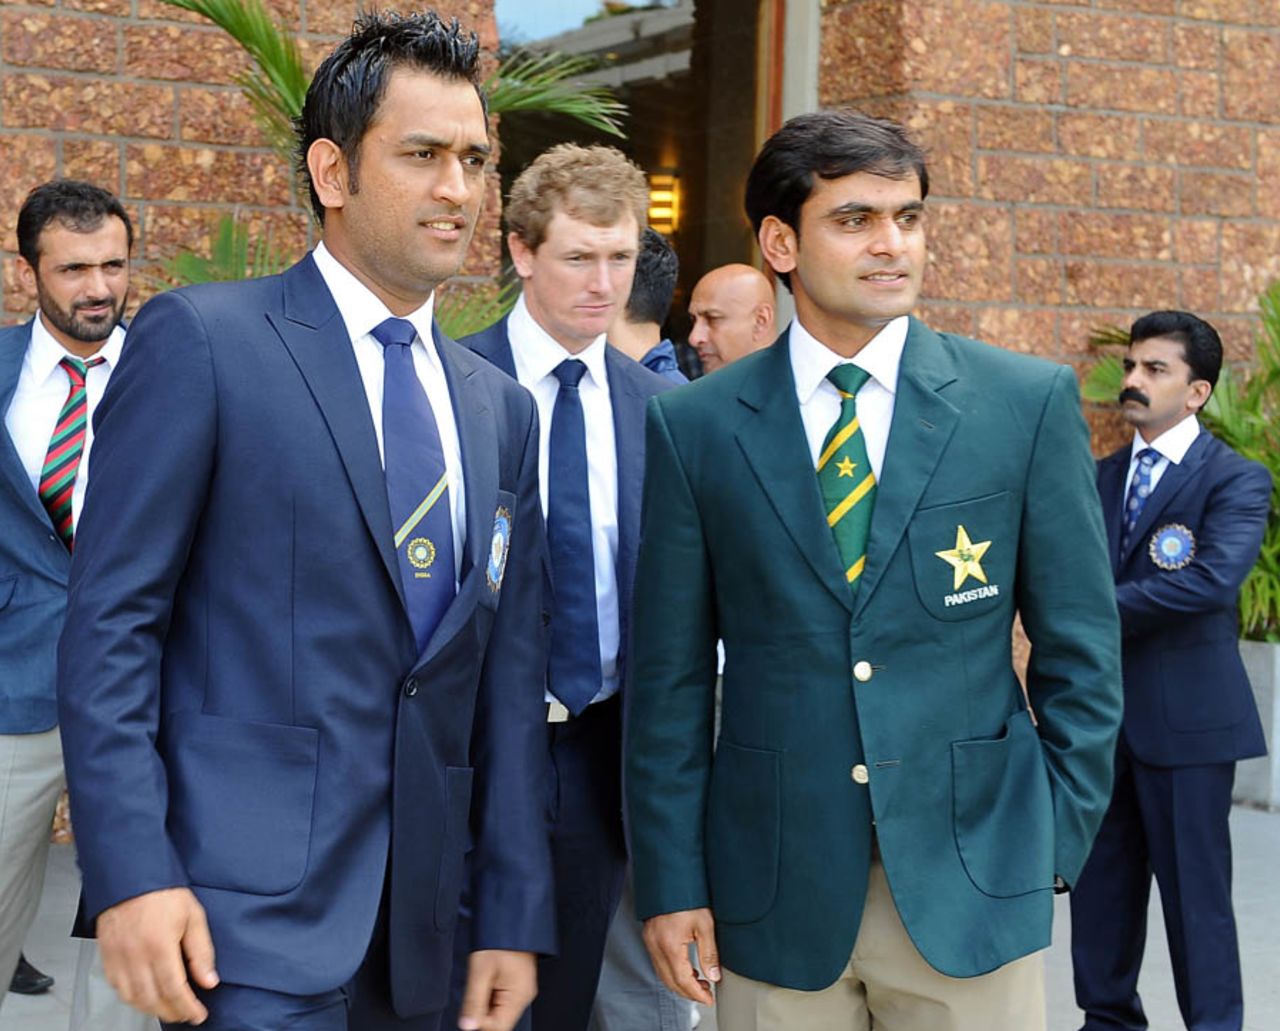 MS Dhoni and Mohammad Hafeez in Colombo before a group photograph, Colombo, September 15, 2012